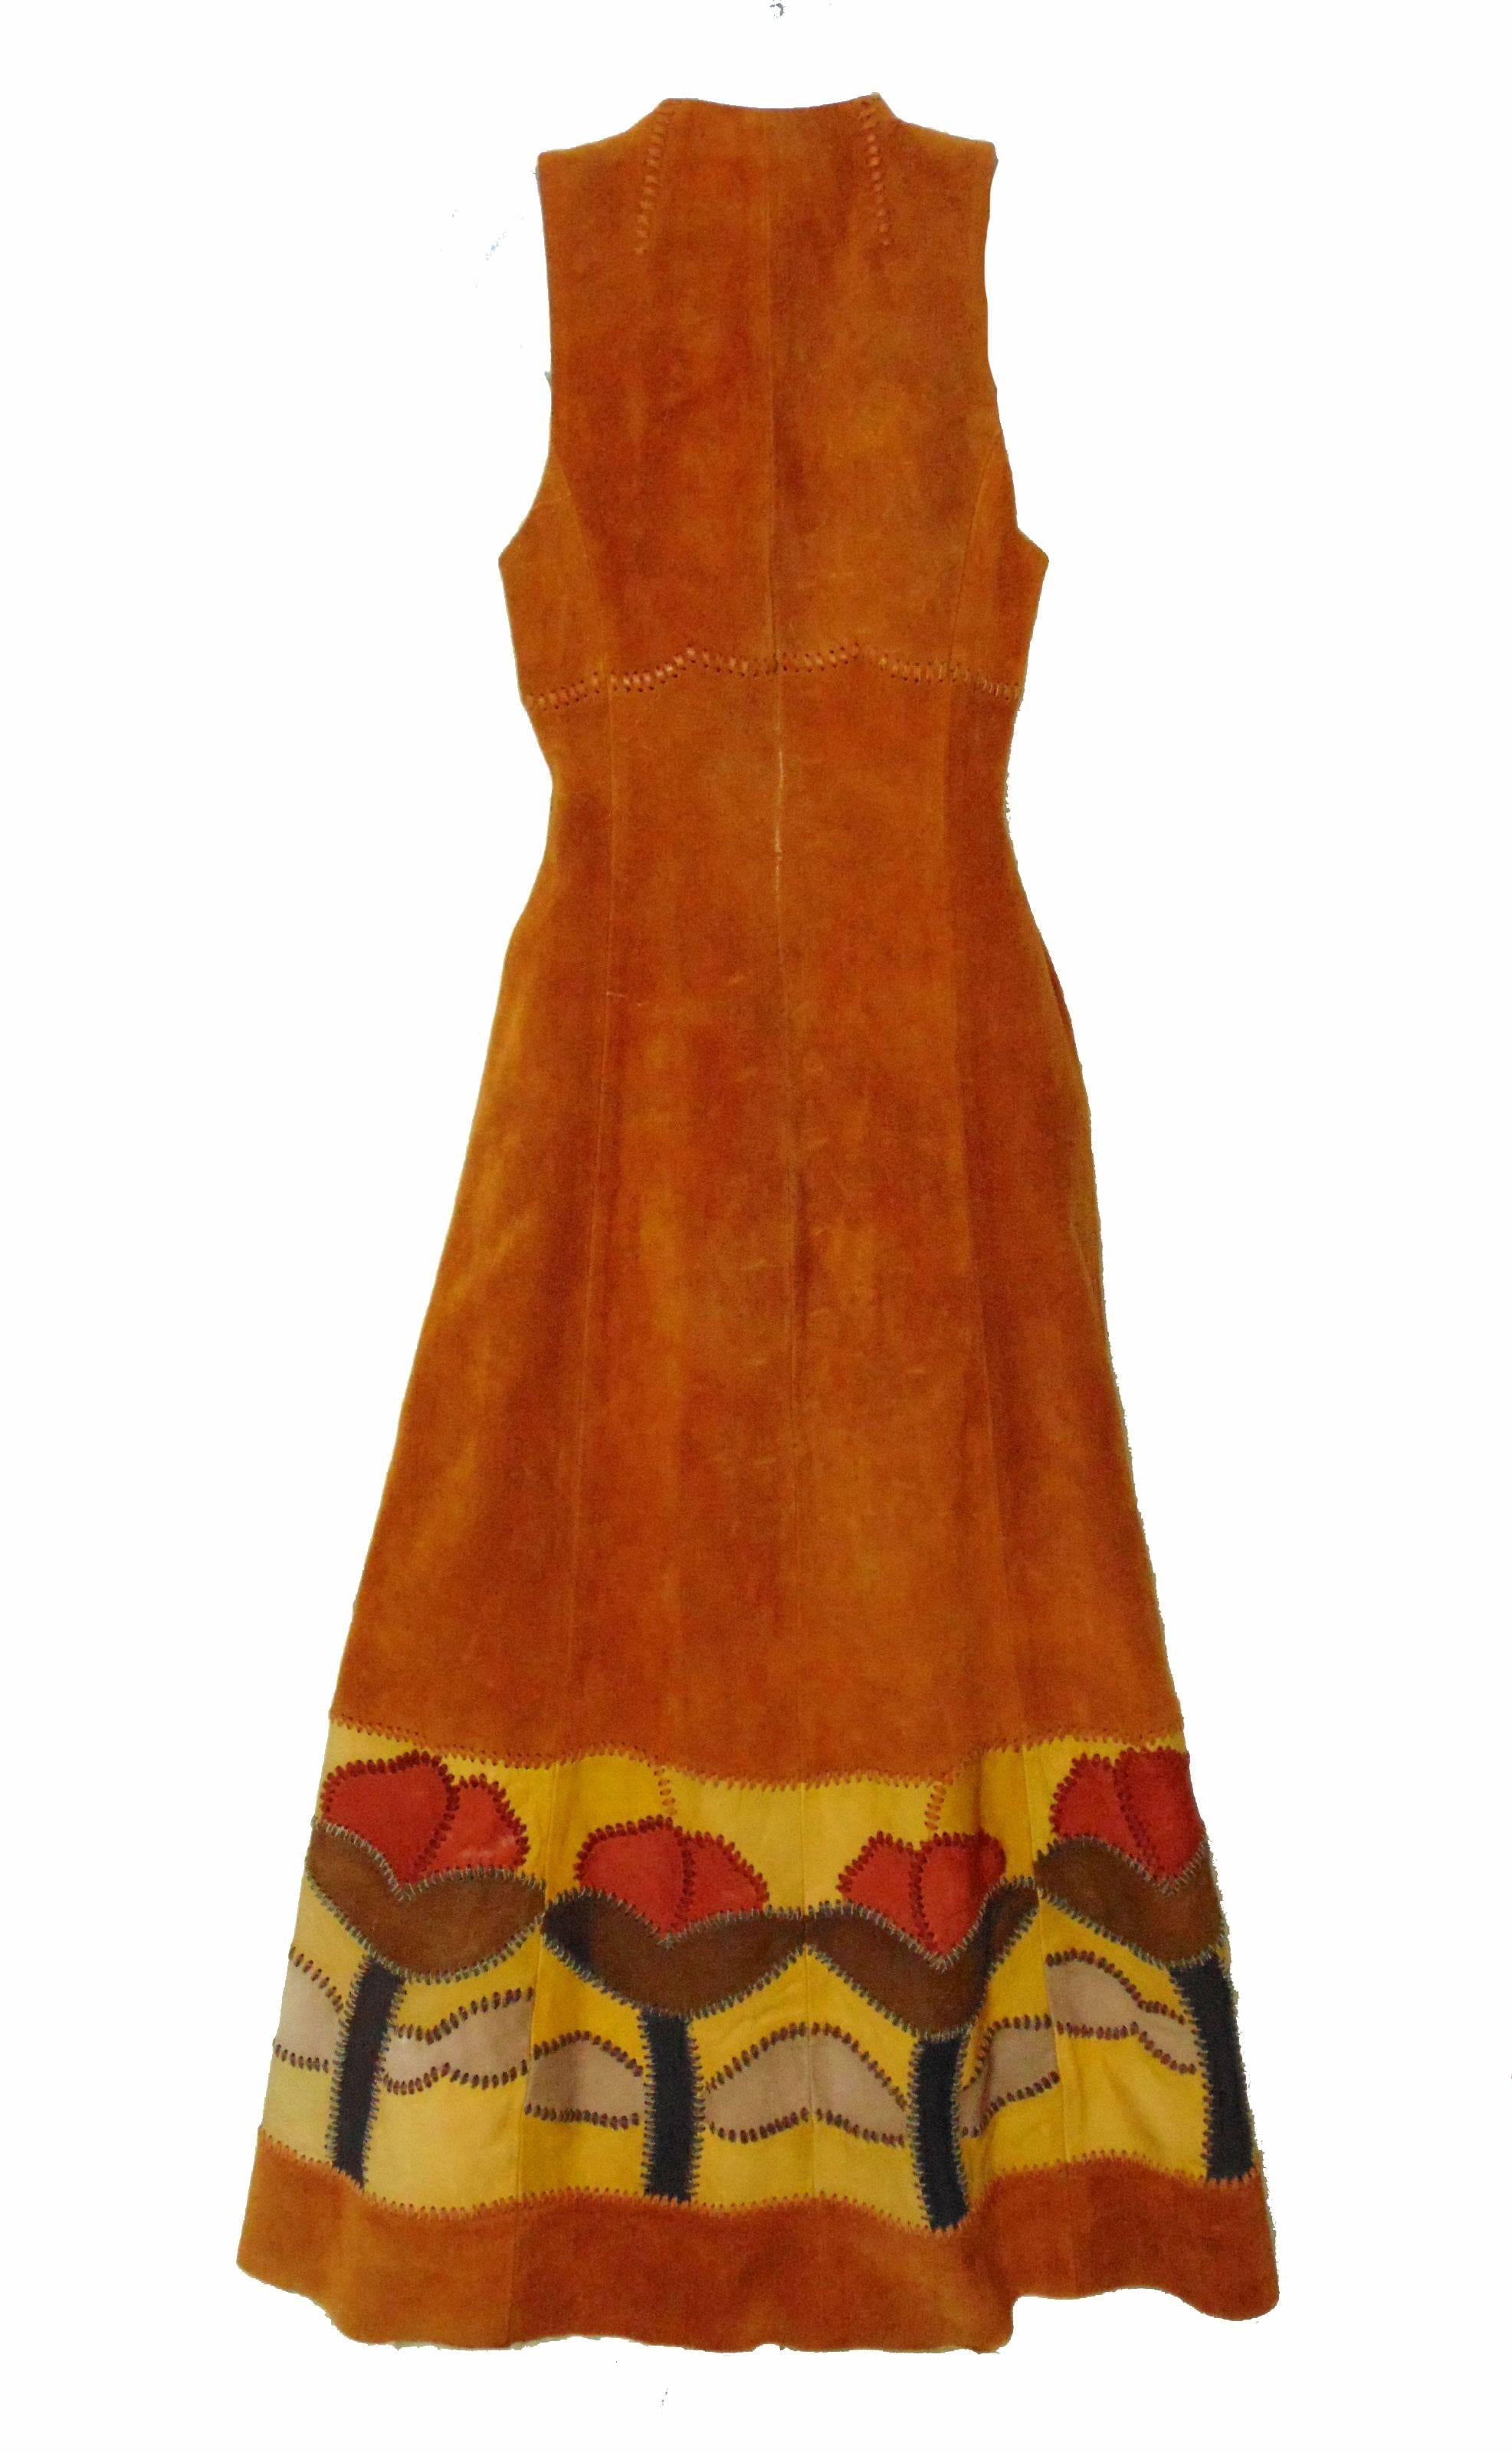 This unusual long festival dress or vest was designed by Char, Charlotte Blankenship de Vasquez, in the early 1970s.  Made from tan suede leather, it features whip stitching and leather floral inserts at the bottom hem and waist ties. So chic - it